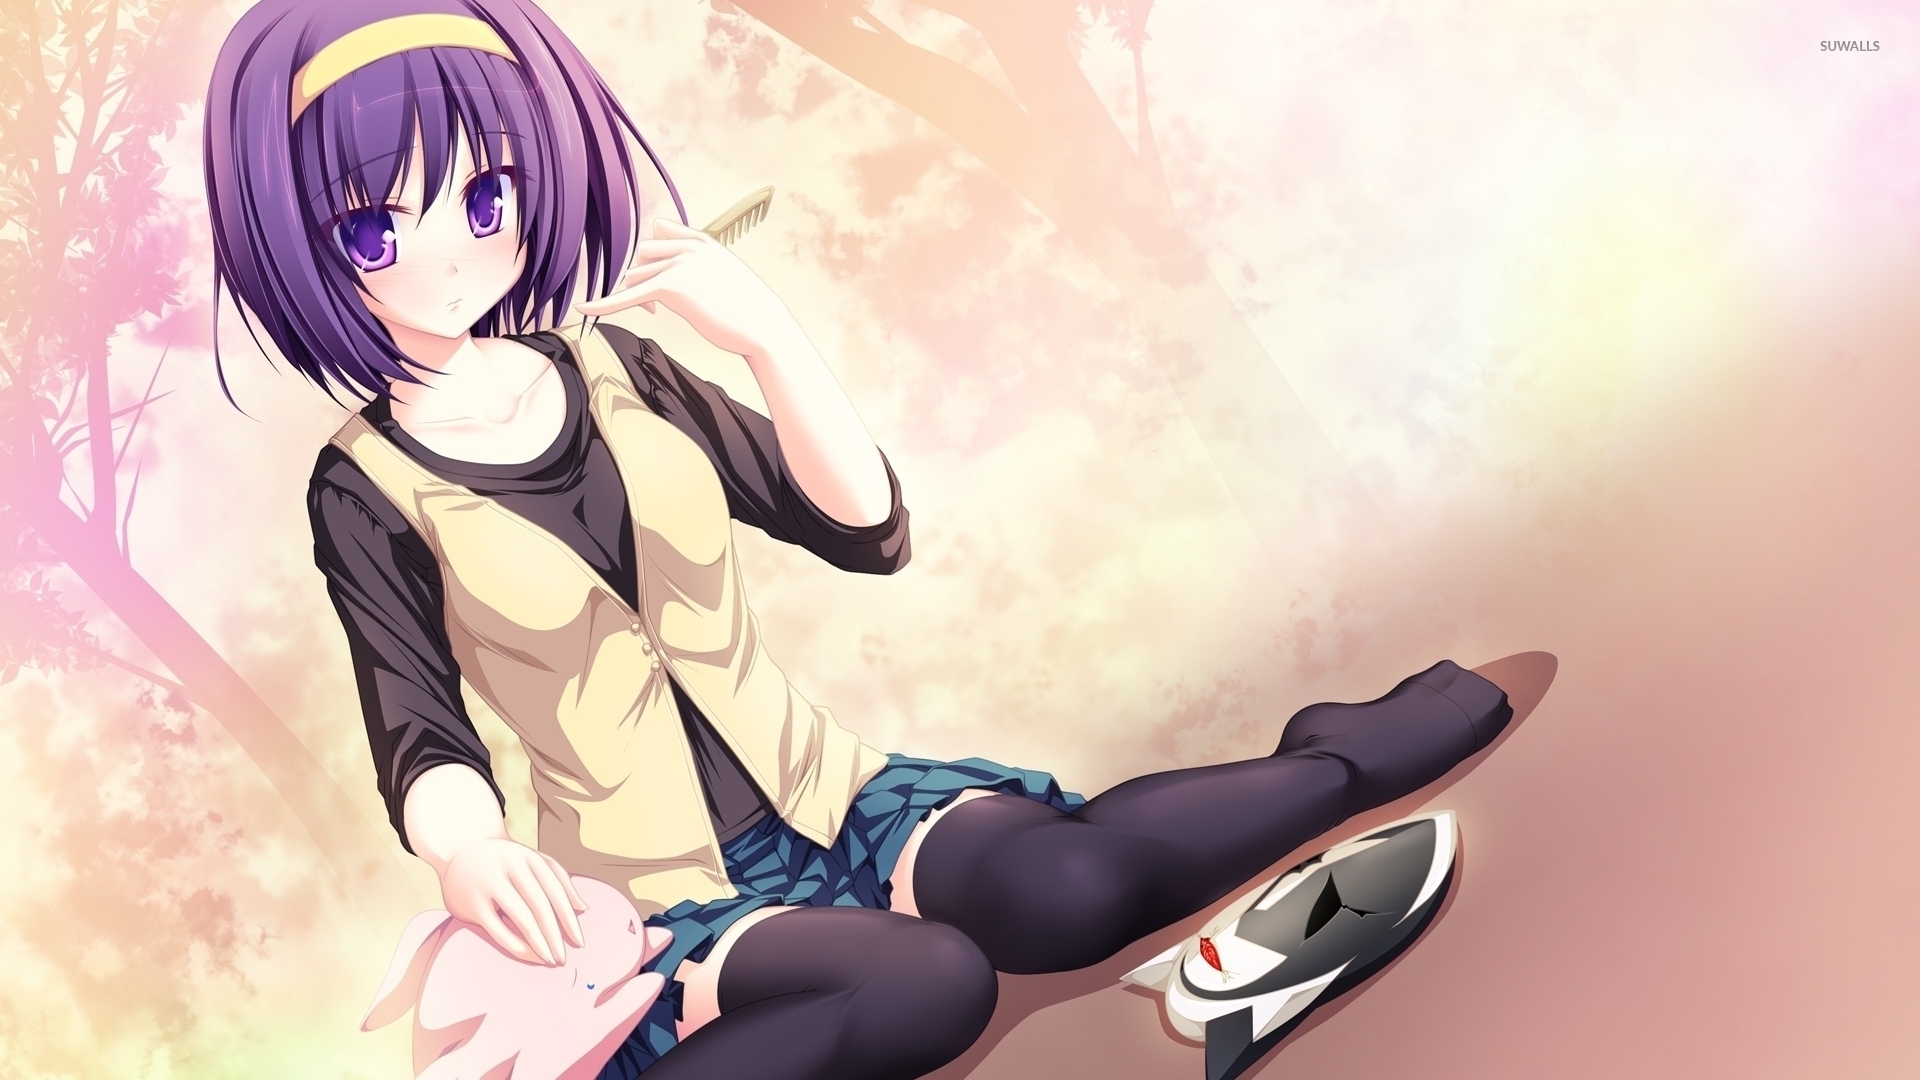 Best of Anime girl with short purple hair